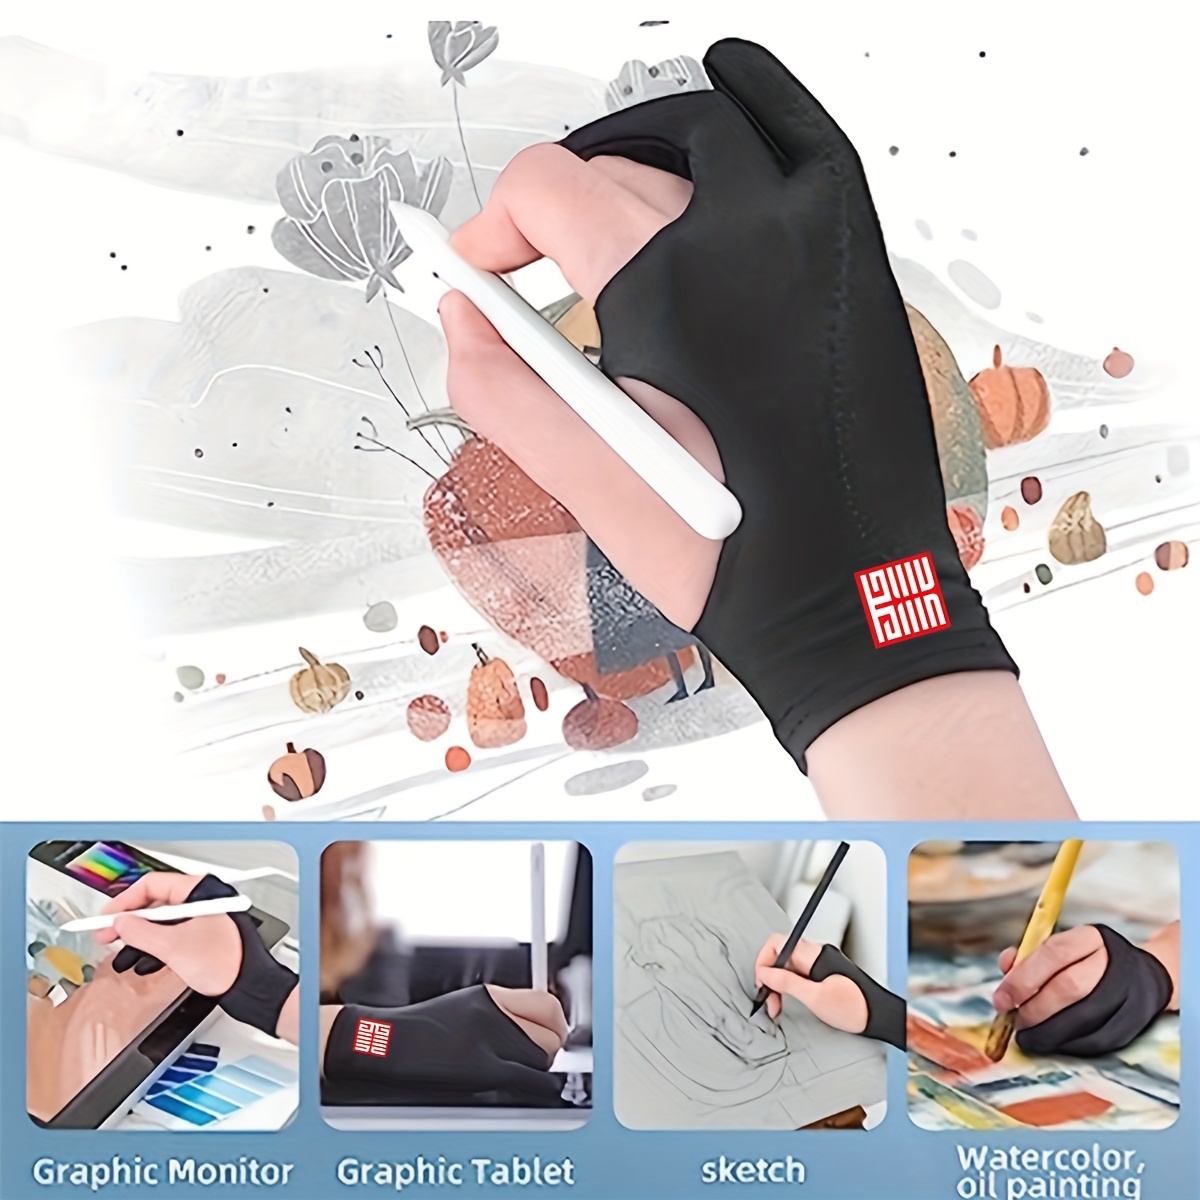 1Pcs Palm Rejection Digital Art Glove with Two Finger for Drawing Tablet  Sketching Display Art Painting iPad Pencil Graphics - AliExpress